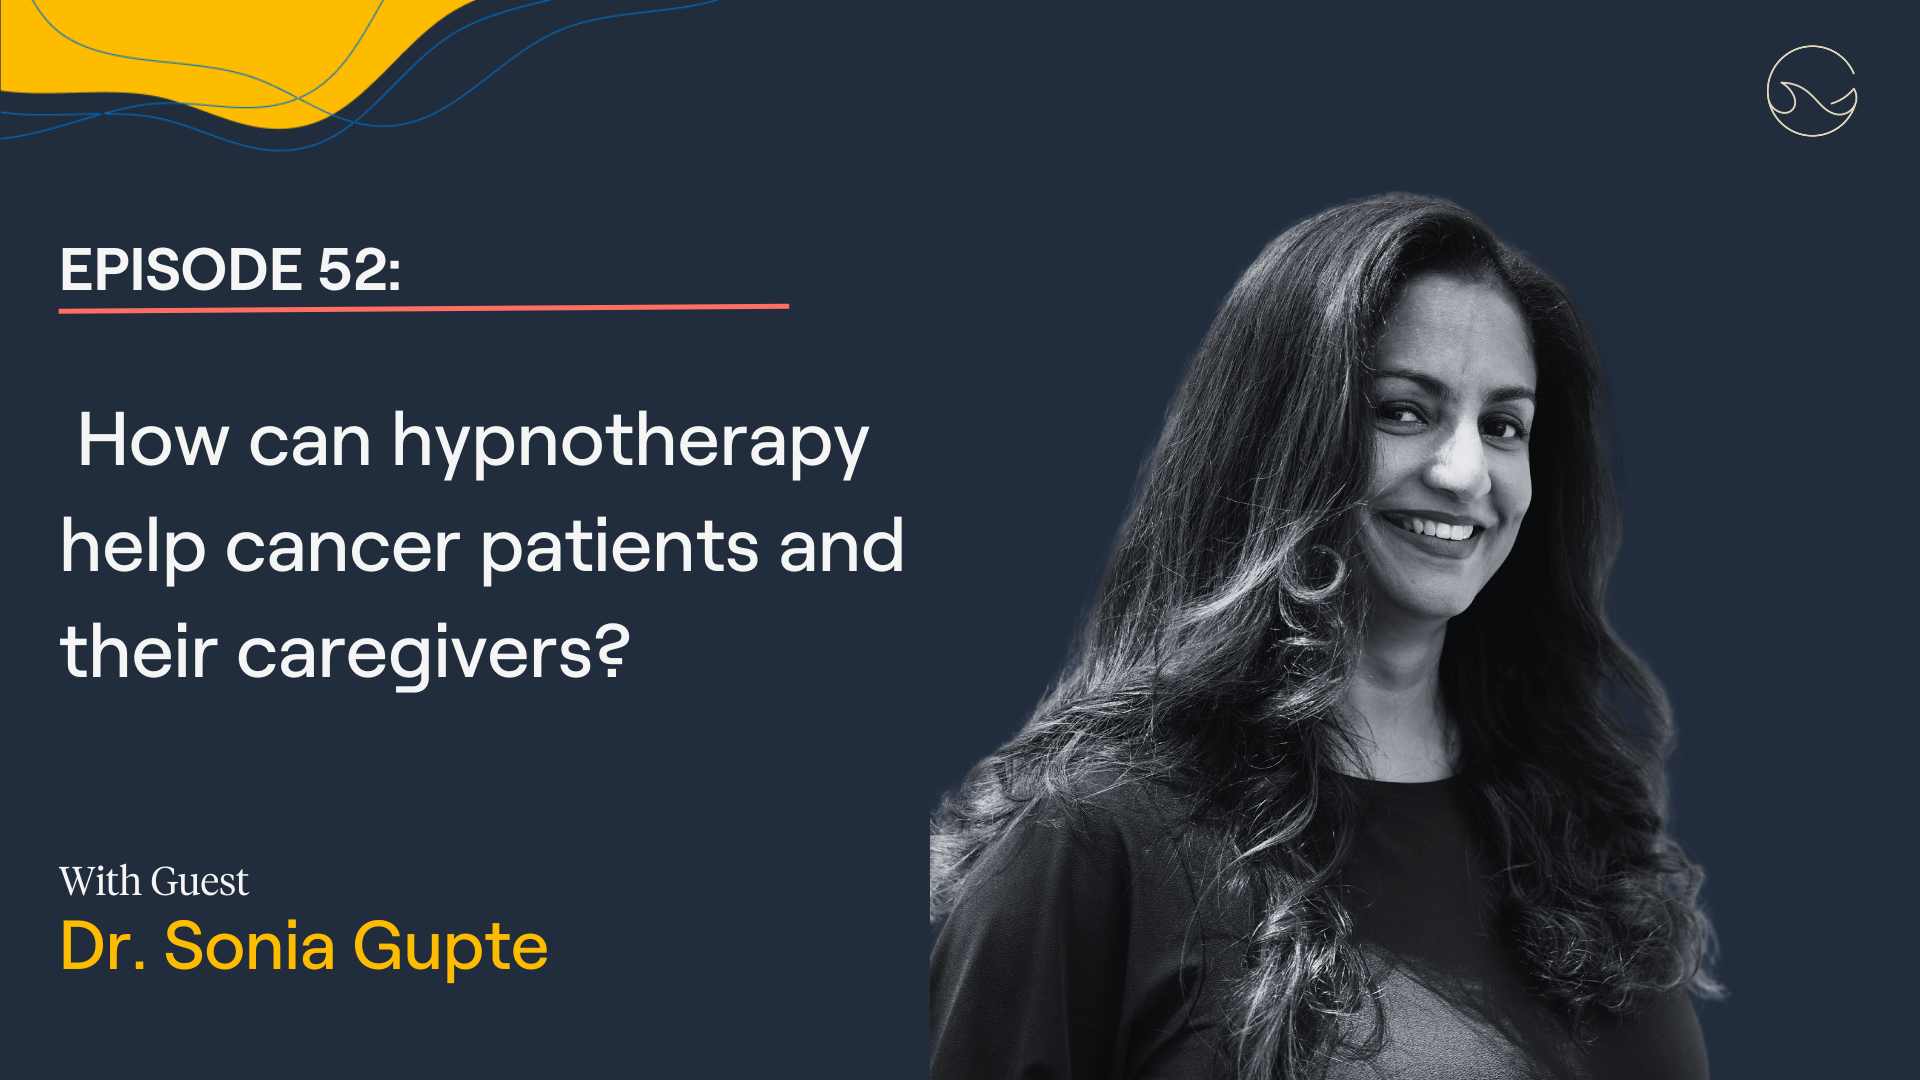 Load video: The latest episode of &quot;The Patient from Hell&quot; features Dr. Sonia Gupte discusses the benefits of hypnotherapy for cancer patients and their caregivers.